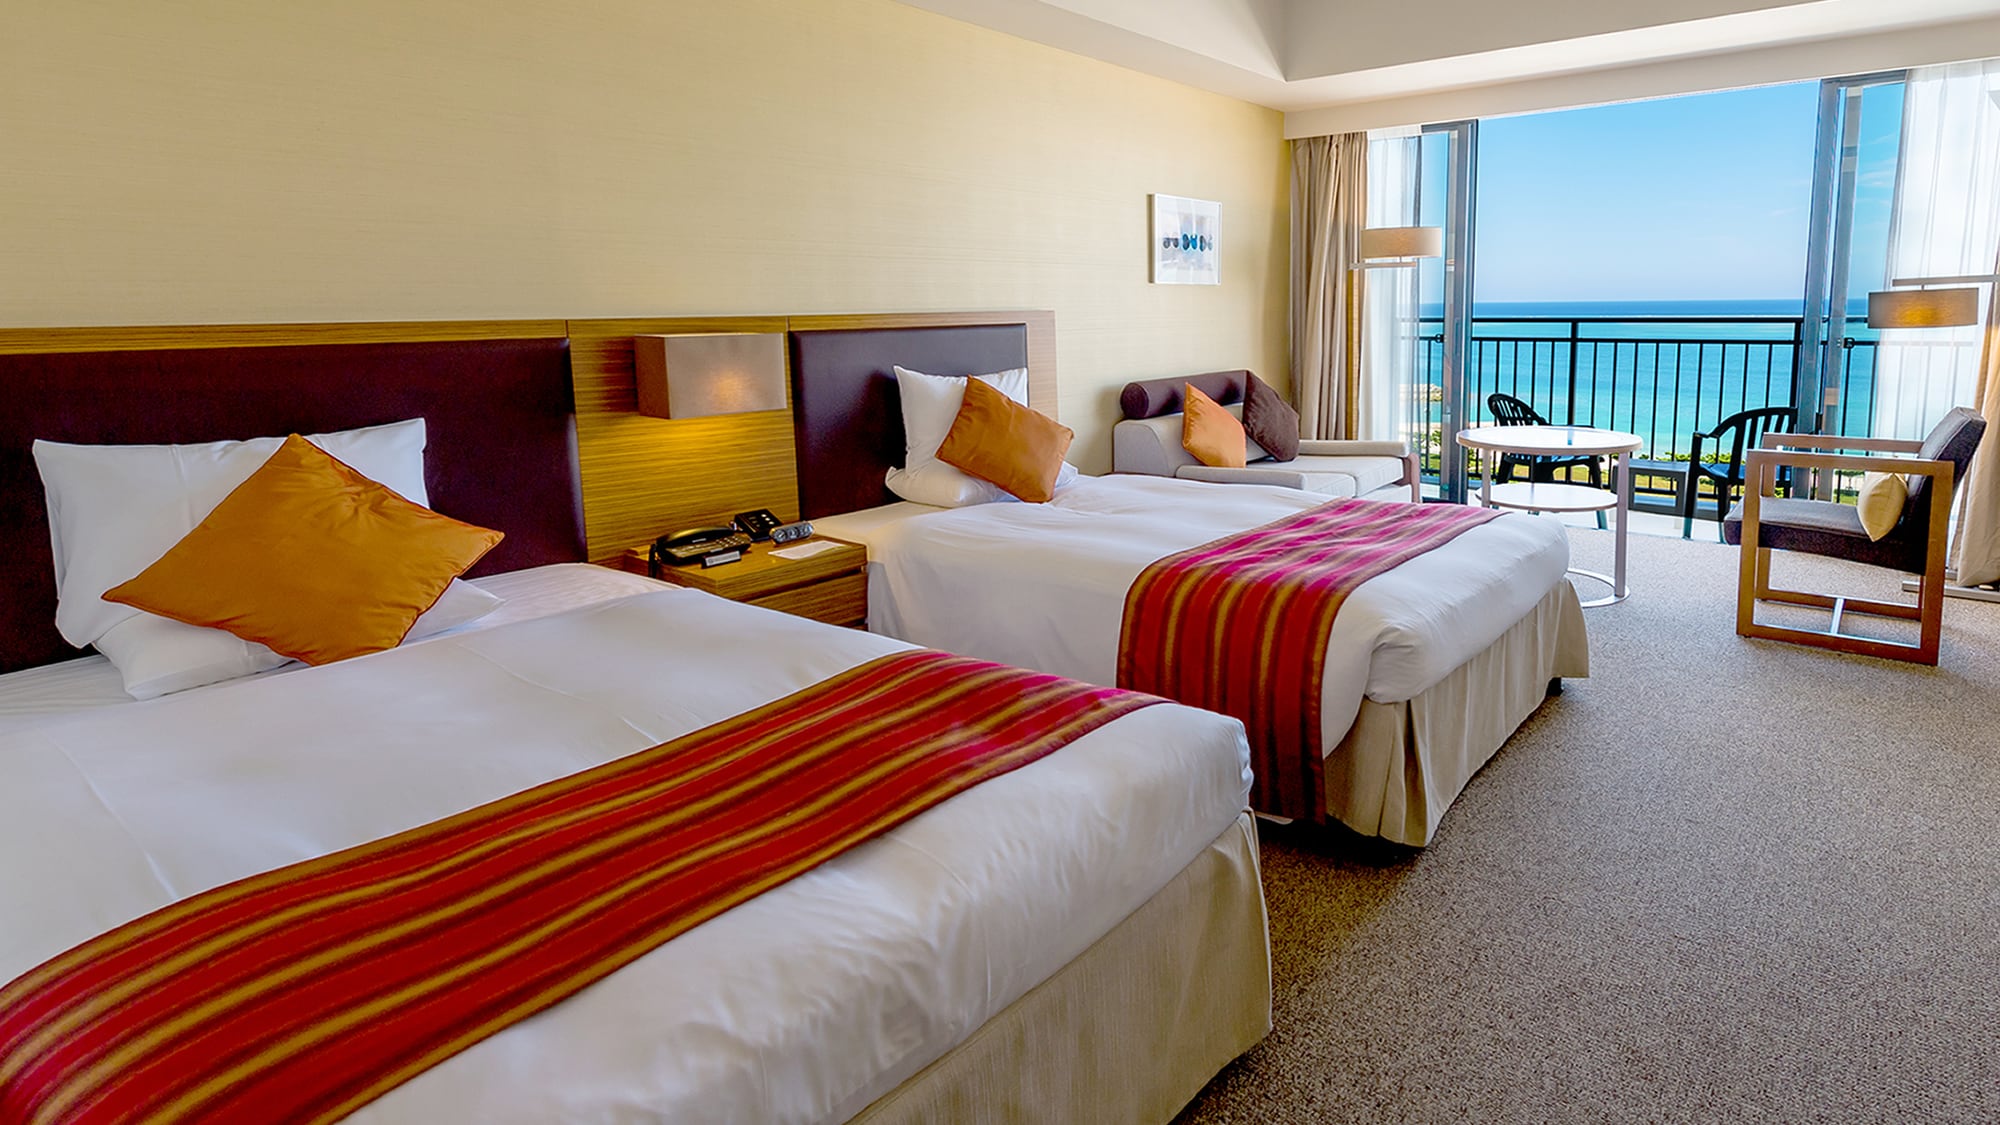 ■ An example of a deluxe ocean room on the 6th to 7th floors